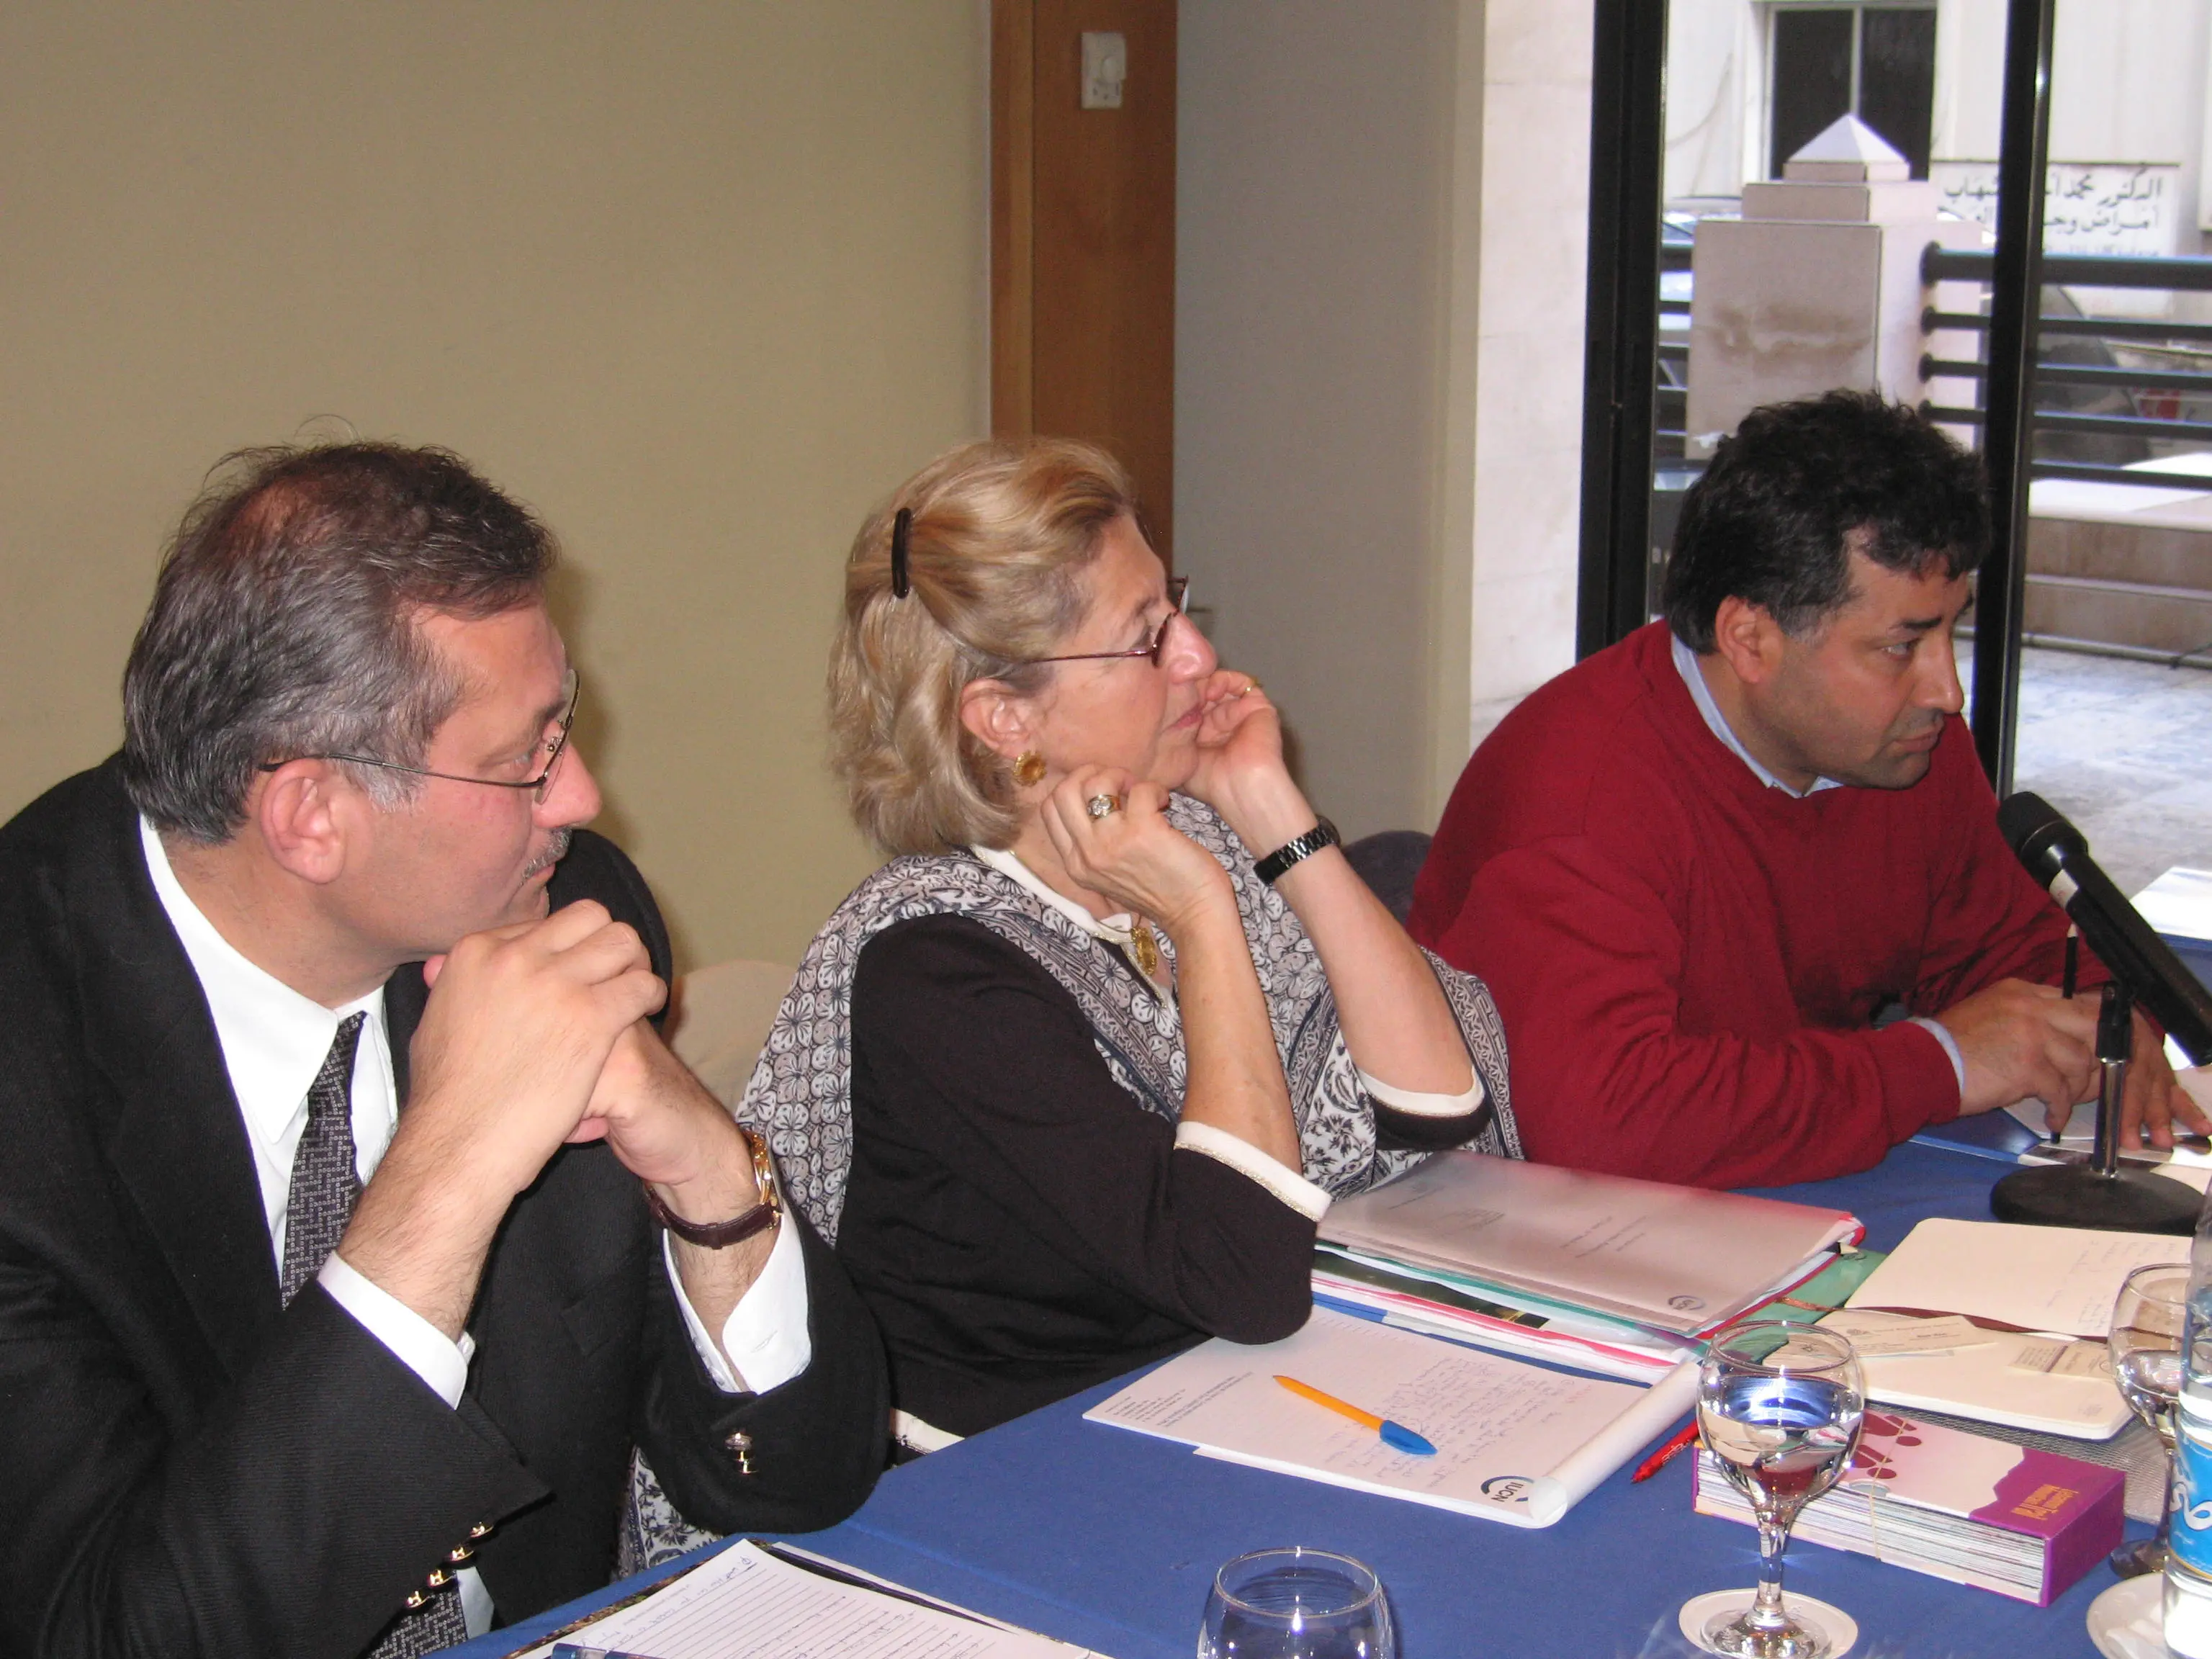 IUCN DG attending the Lebanon National Committee Meeting in Beirut